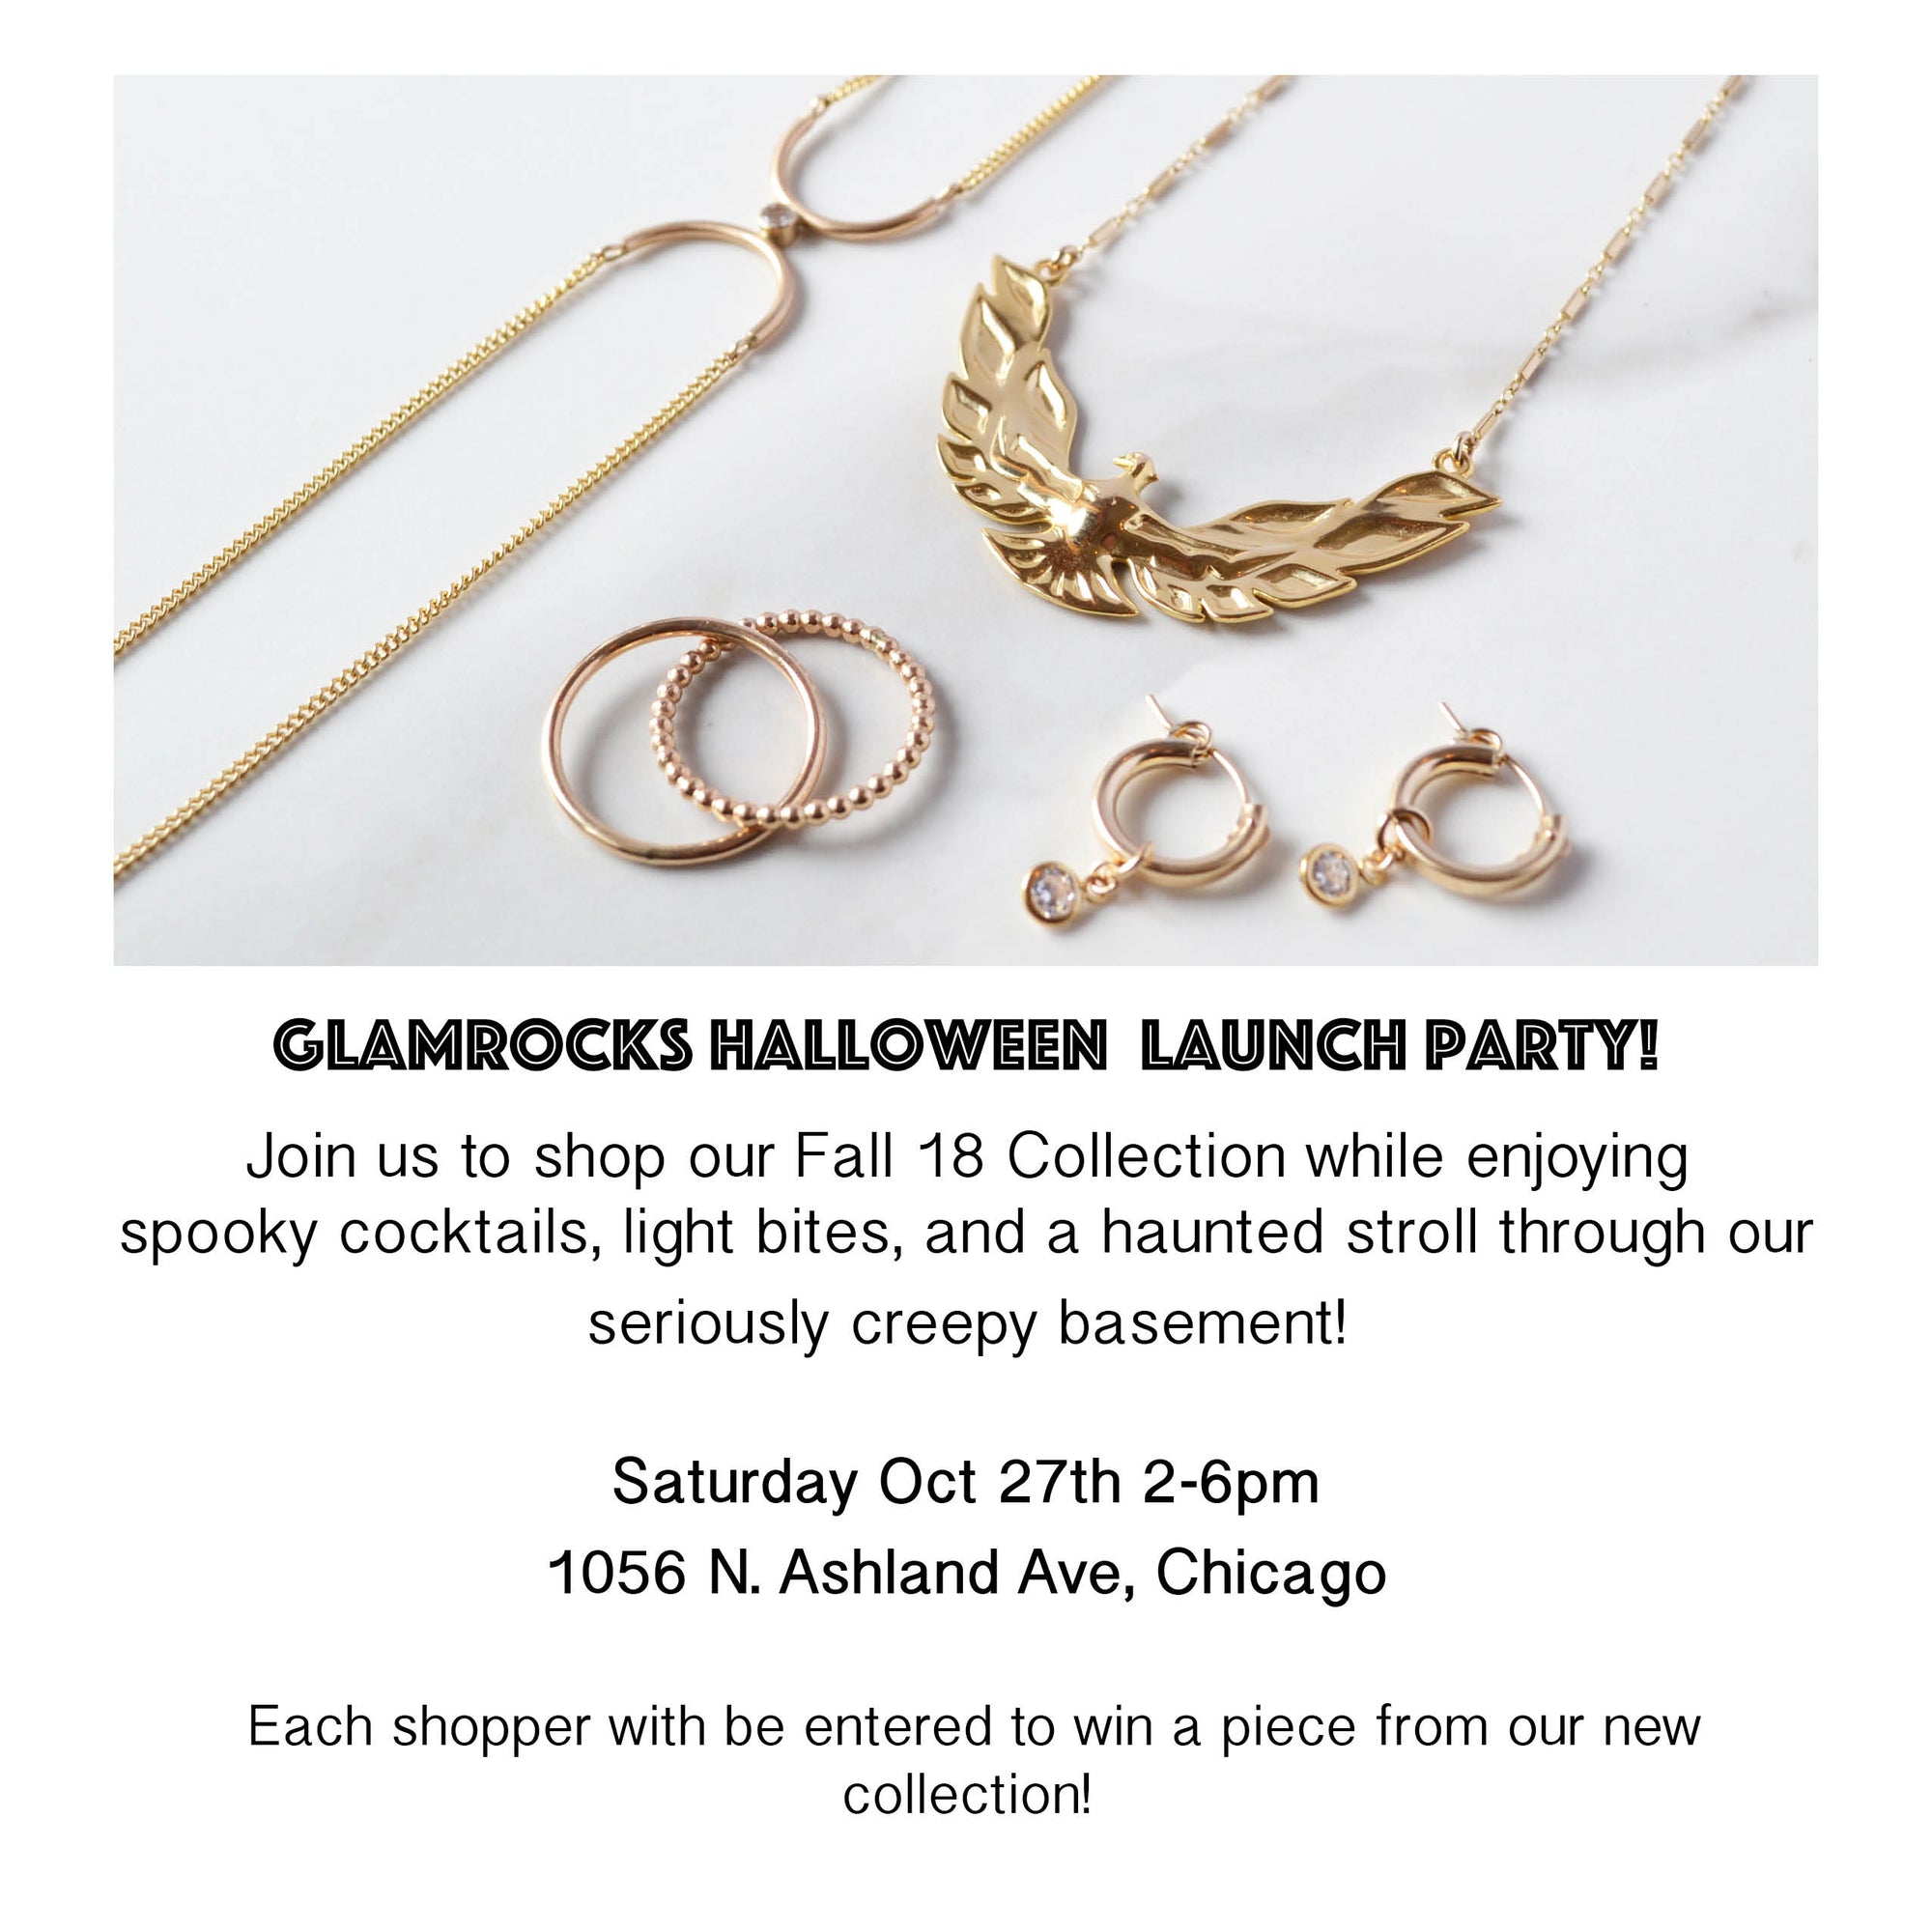 Halloween Launch Party!